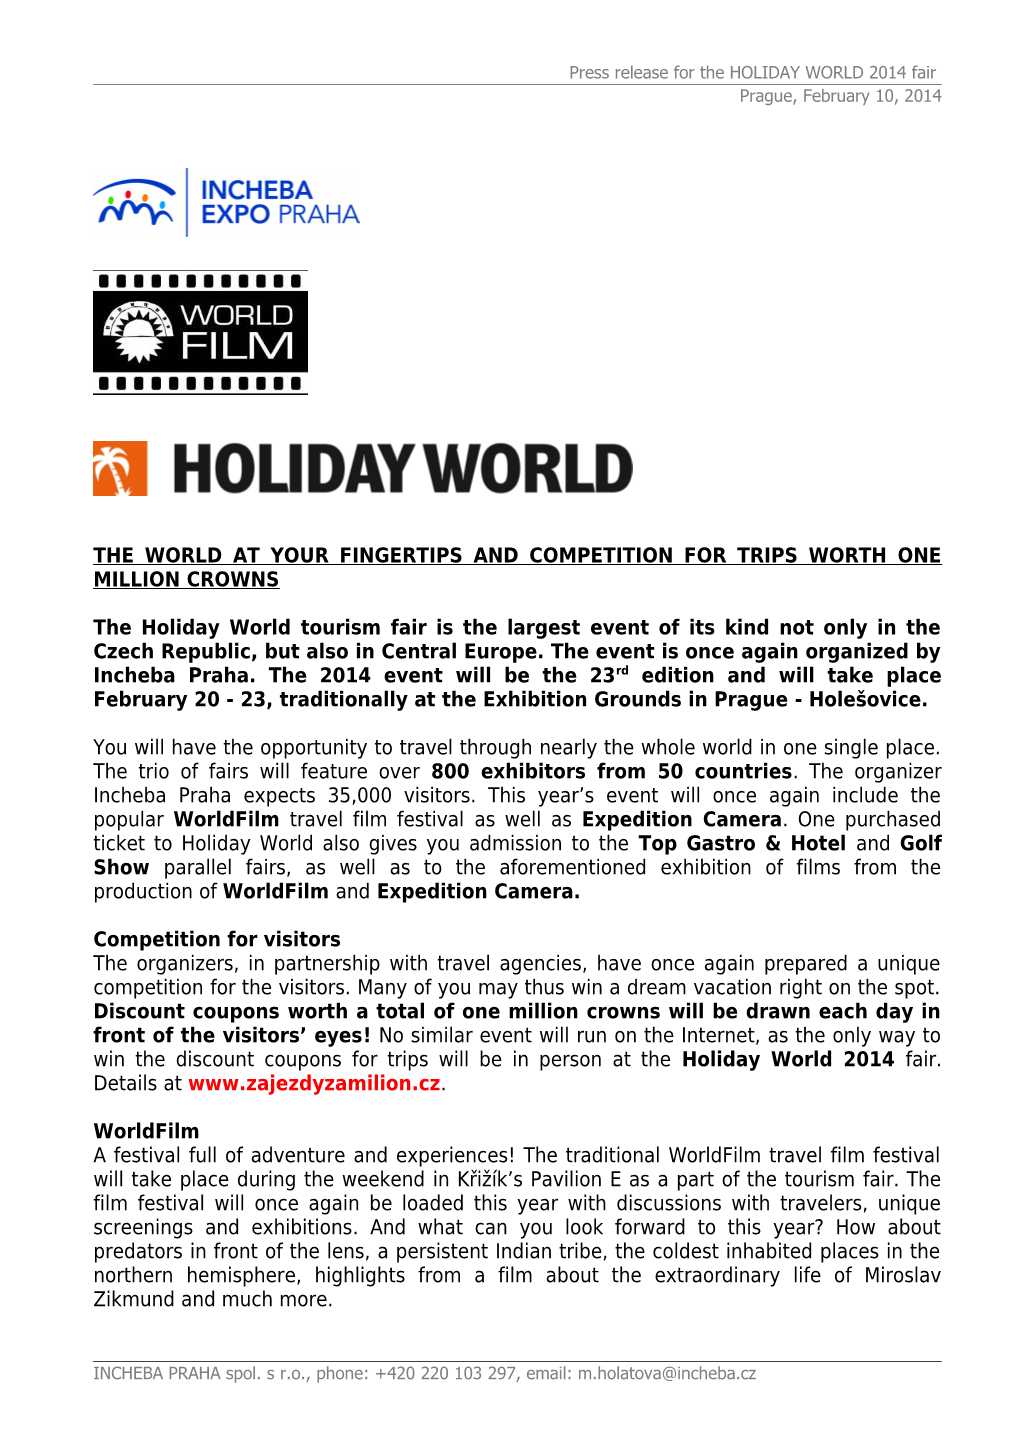 Press Release for Theholiday WORLD 2014 Fair